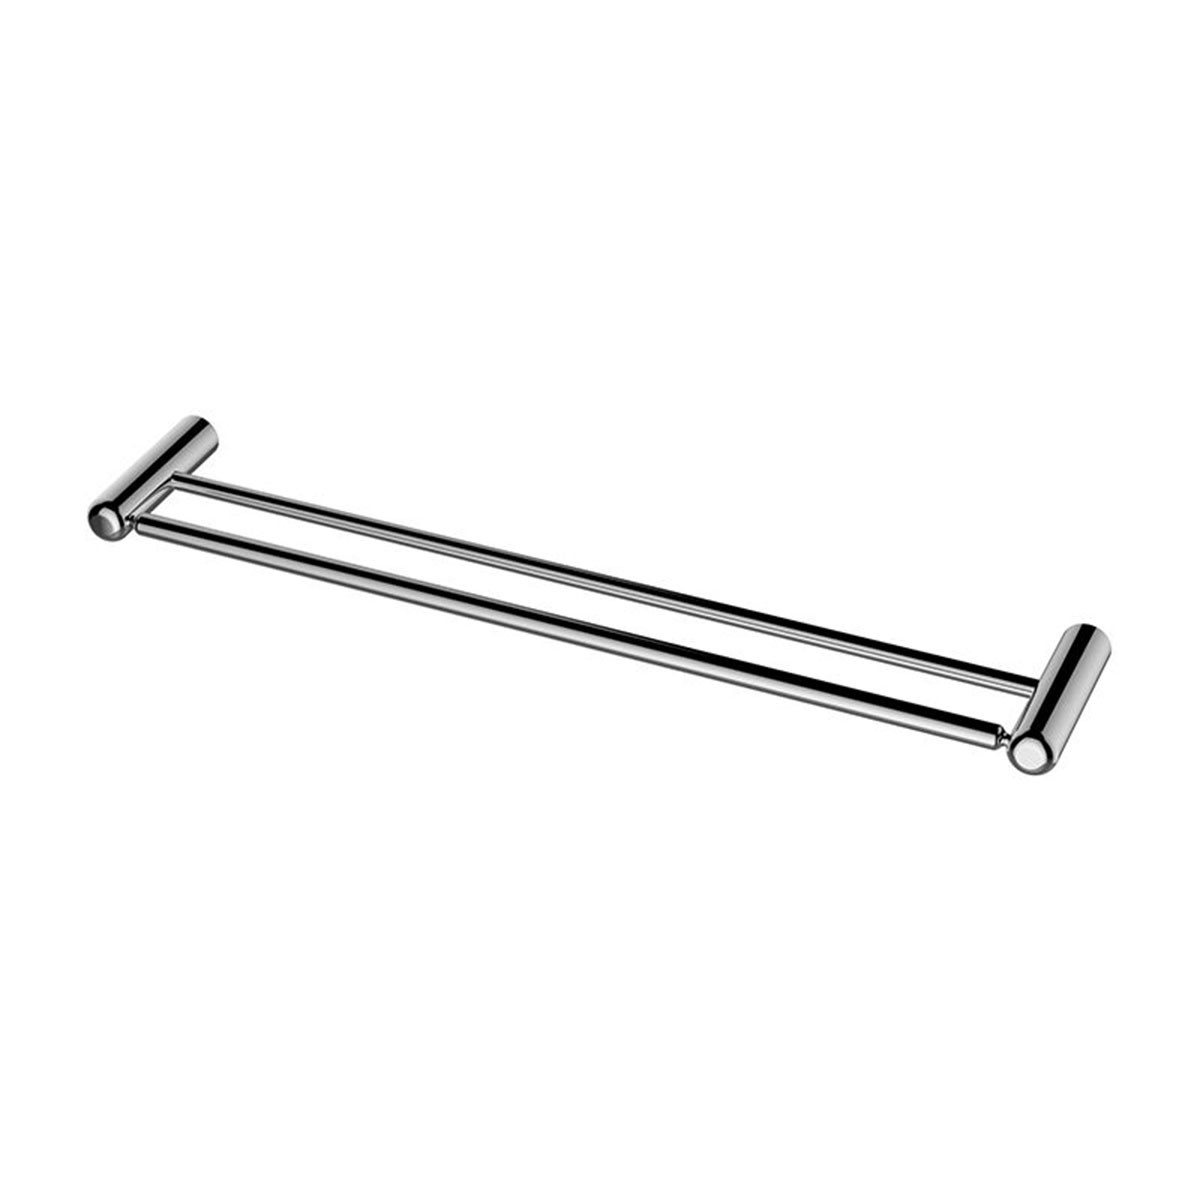 Double Towel Bar 23.6 Inch - Chrome Plated Stainless Steel (OD80611)